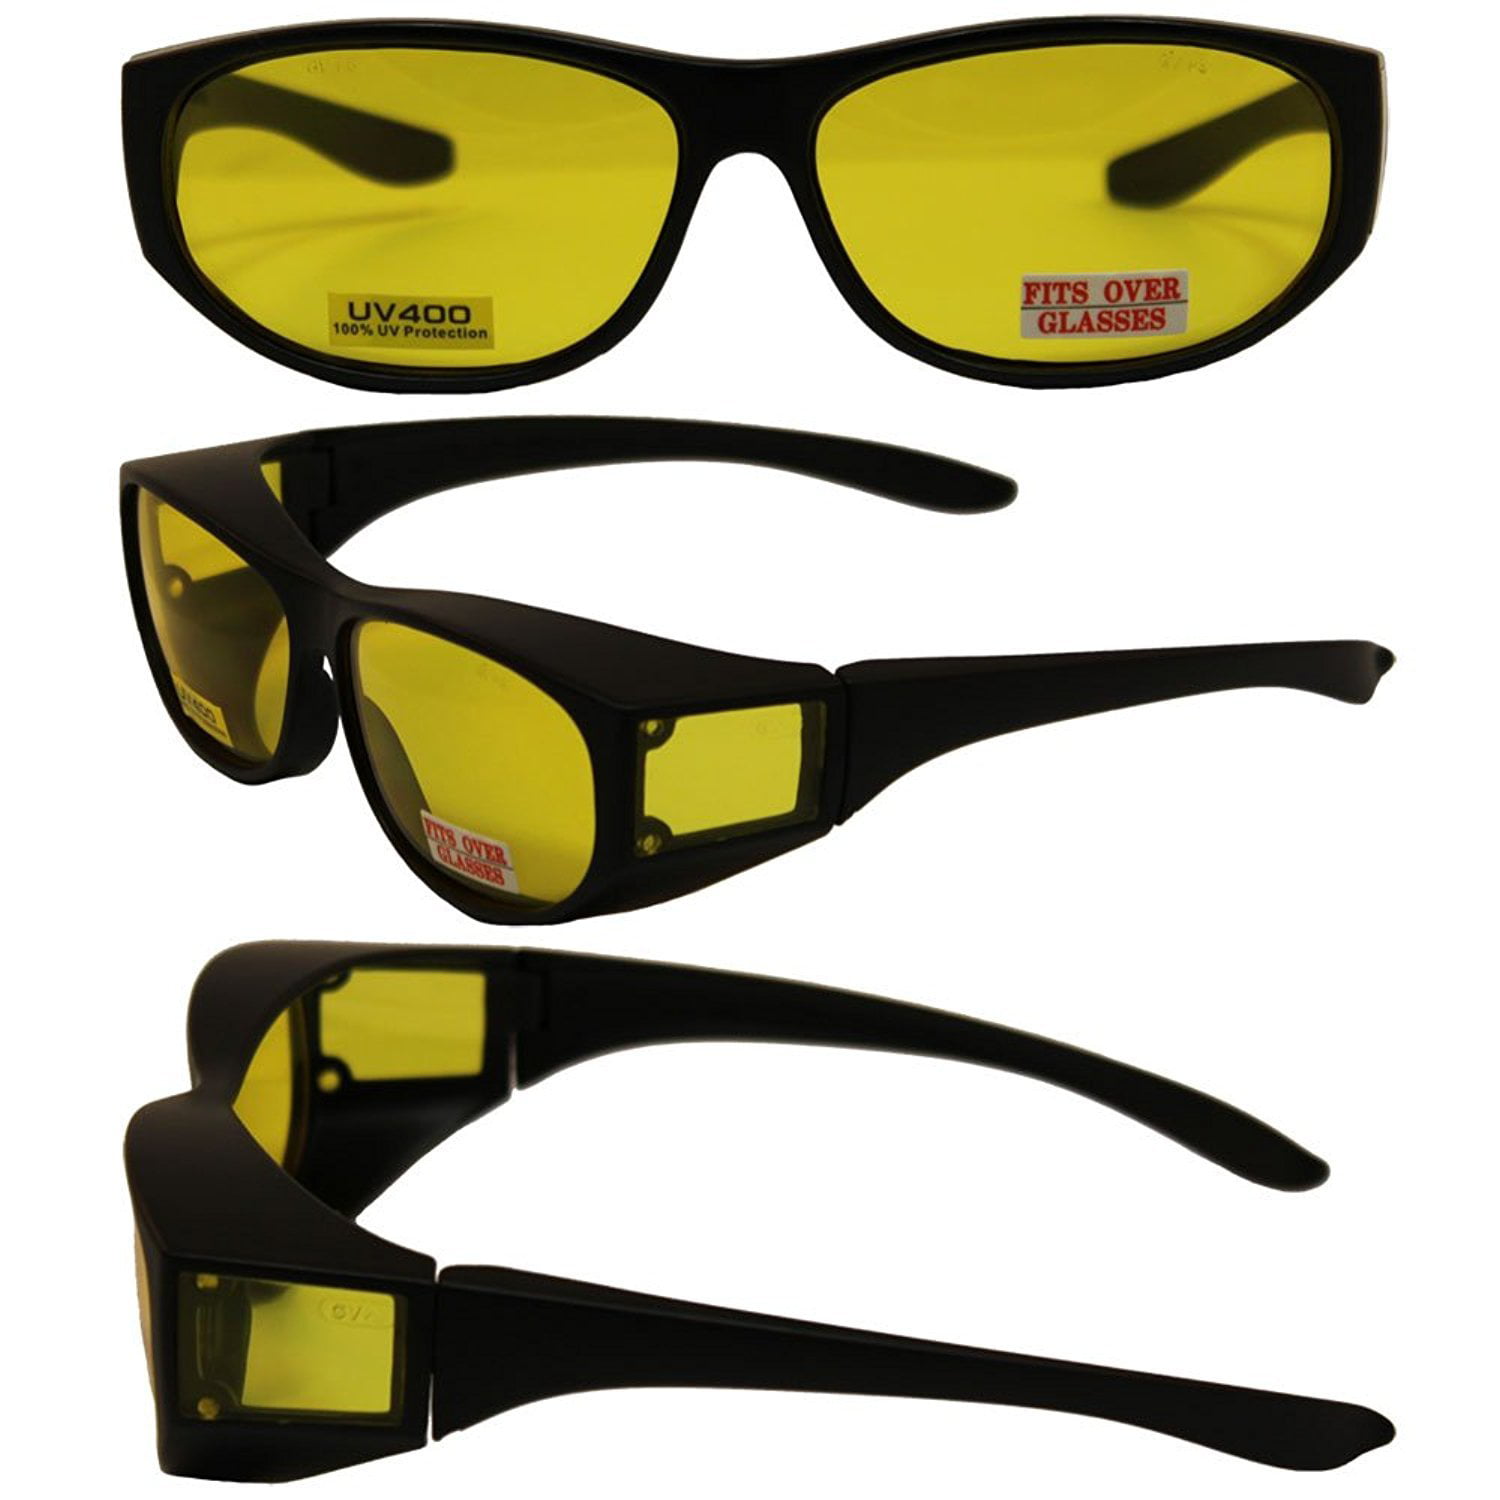 Two 2 Pairs Escort Safety Glasses Fits Over Most Prescription Eyewear Yellow Lenses Walmart 